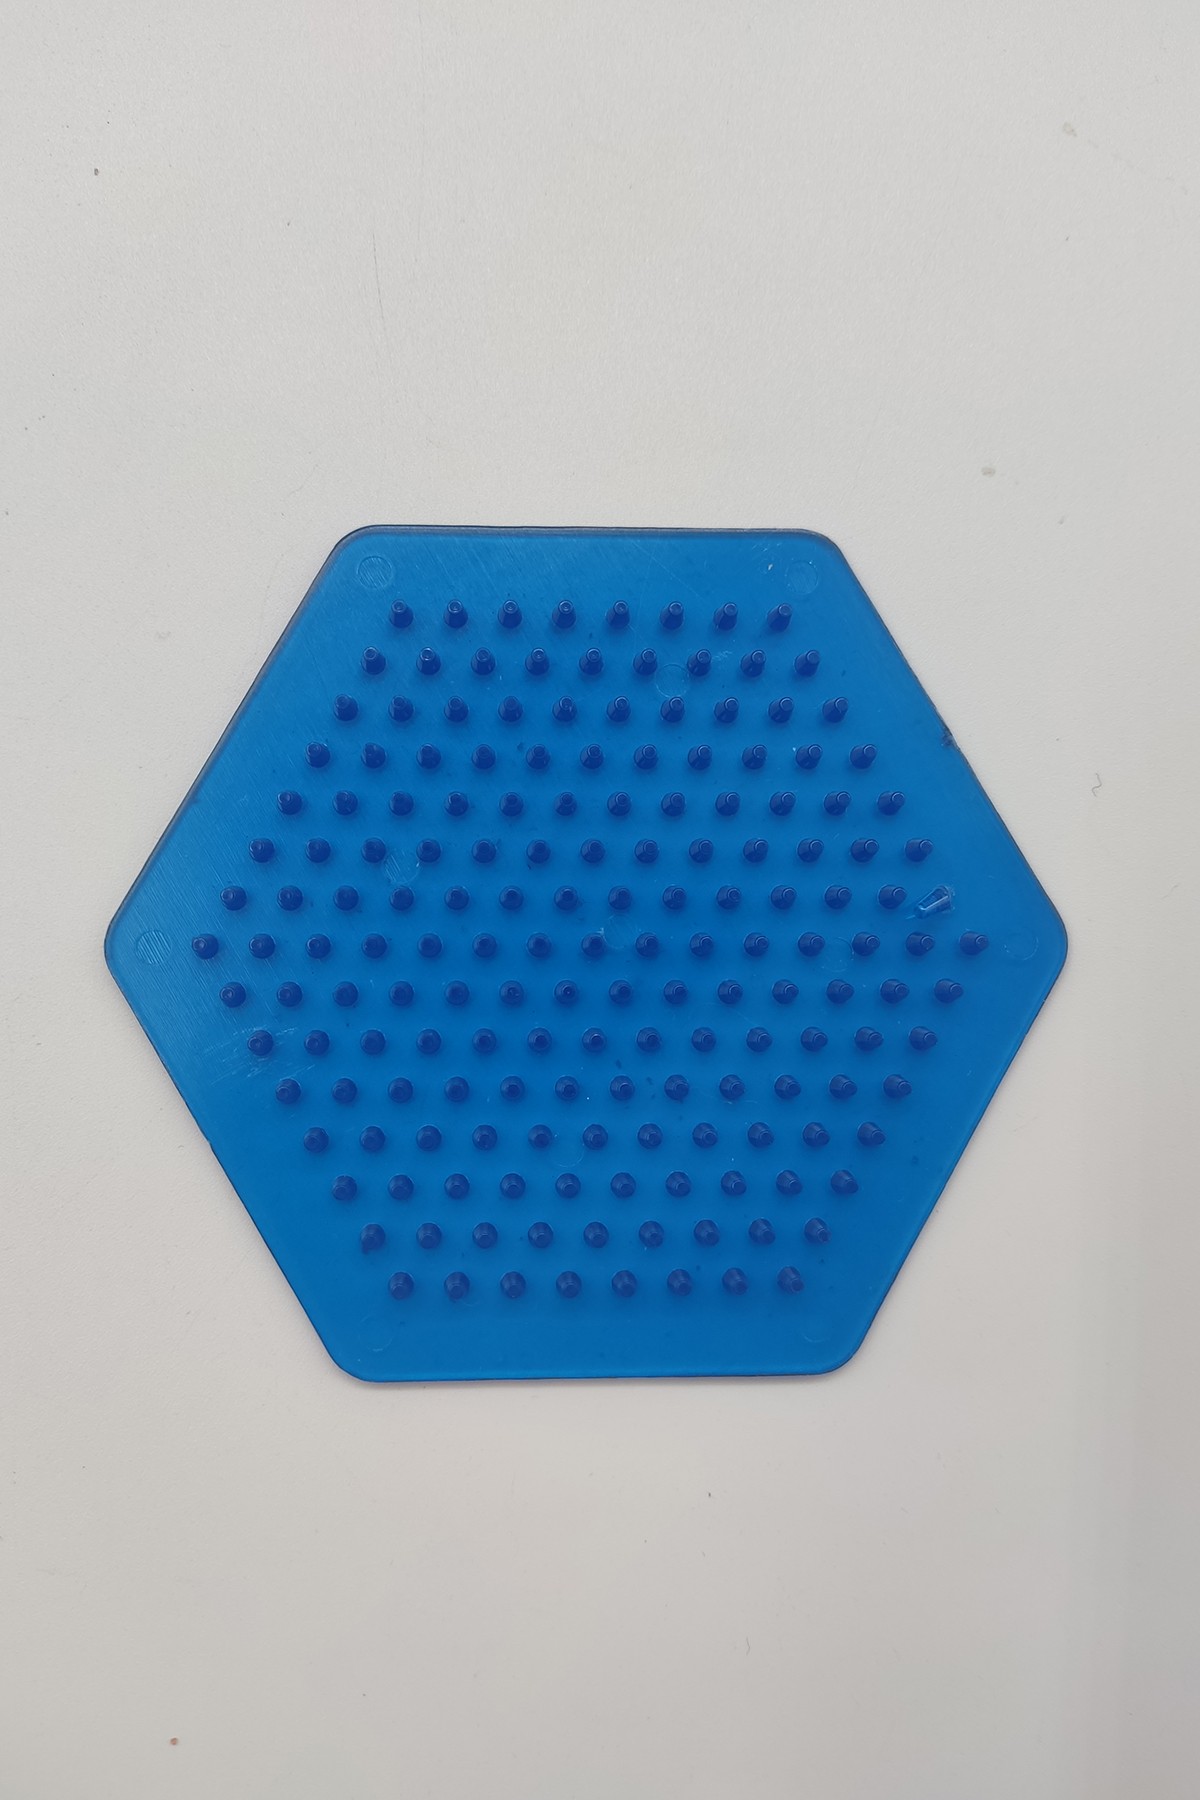 Pixel Pixel Pegboard For Beading Blue Hexagon PPP16-10